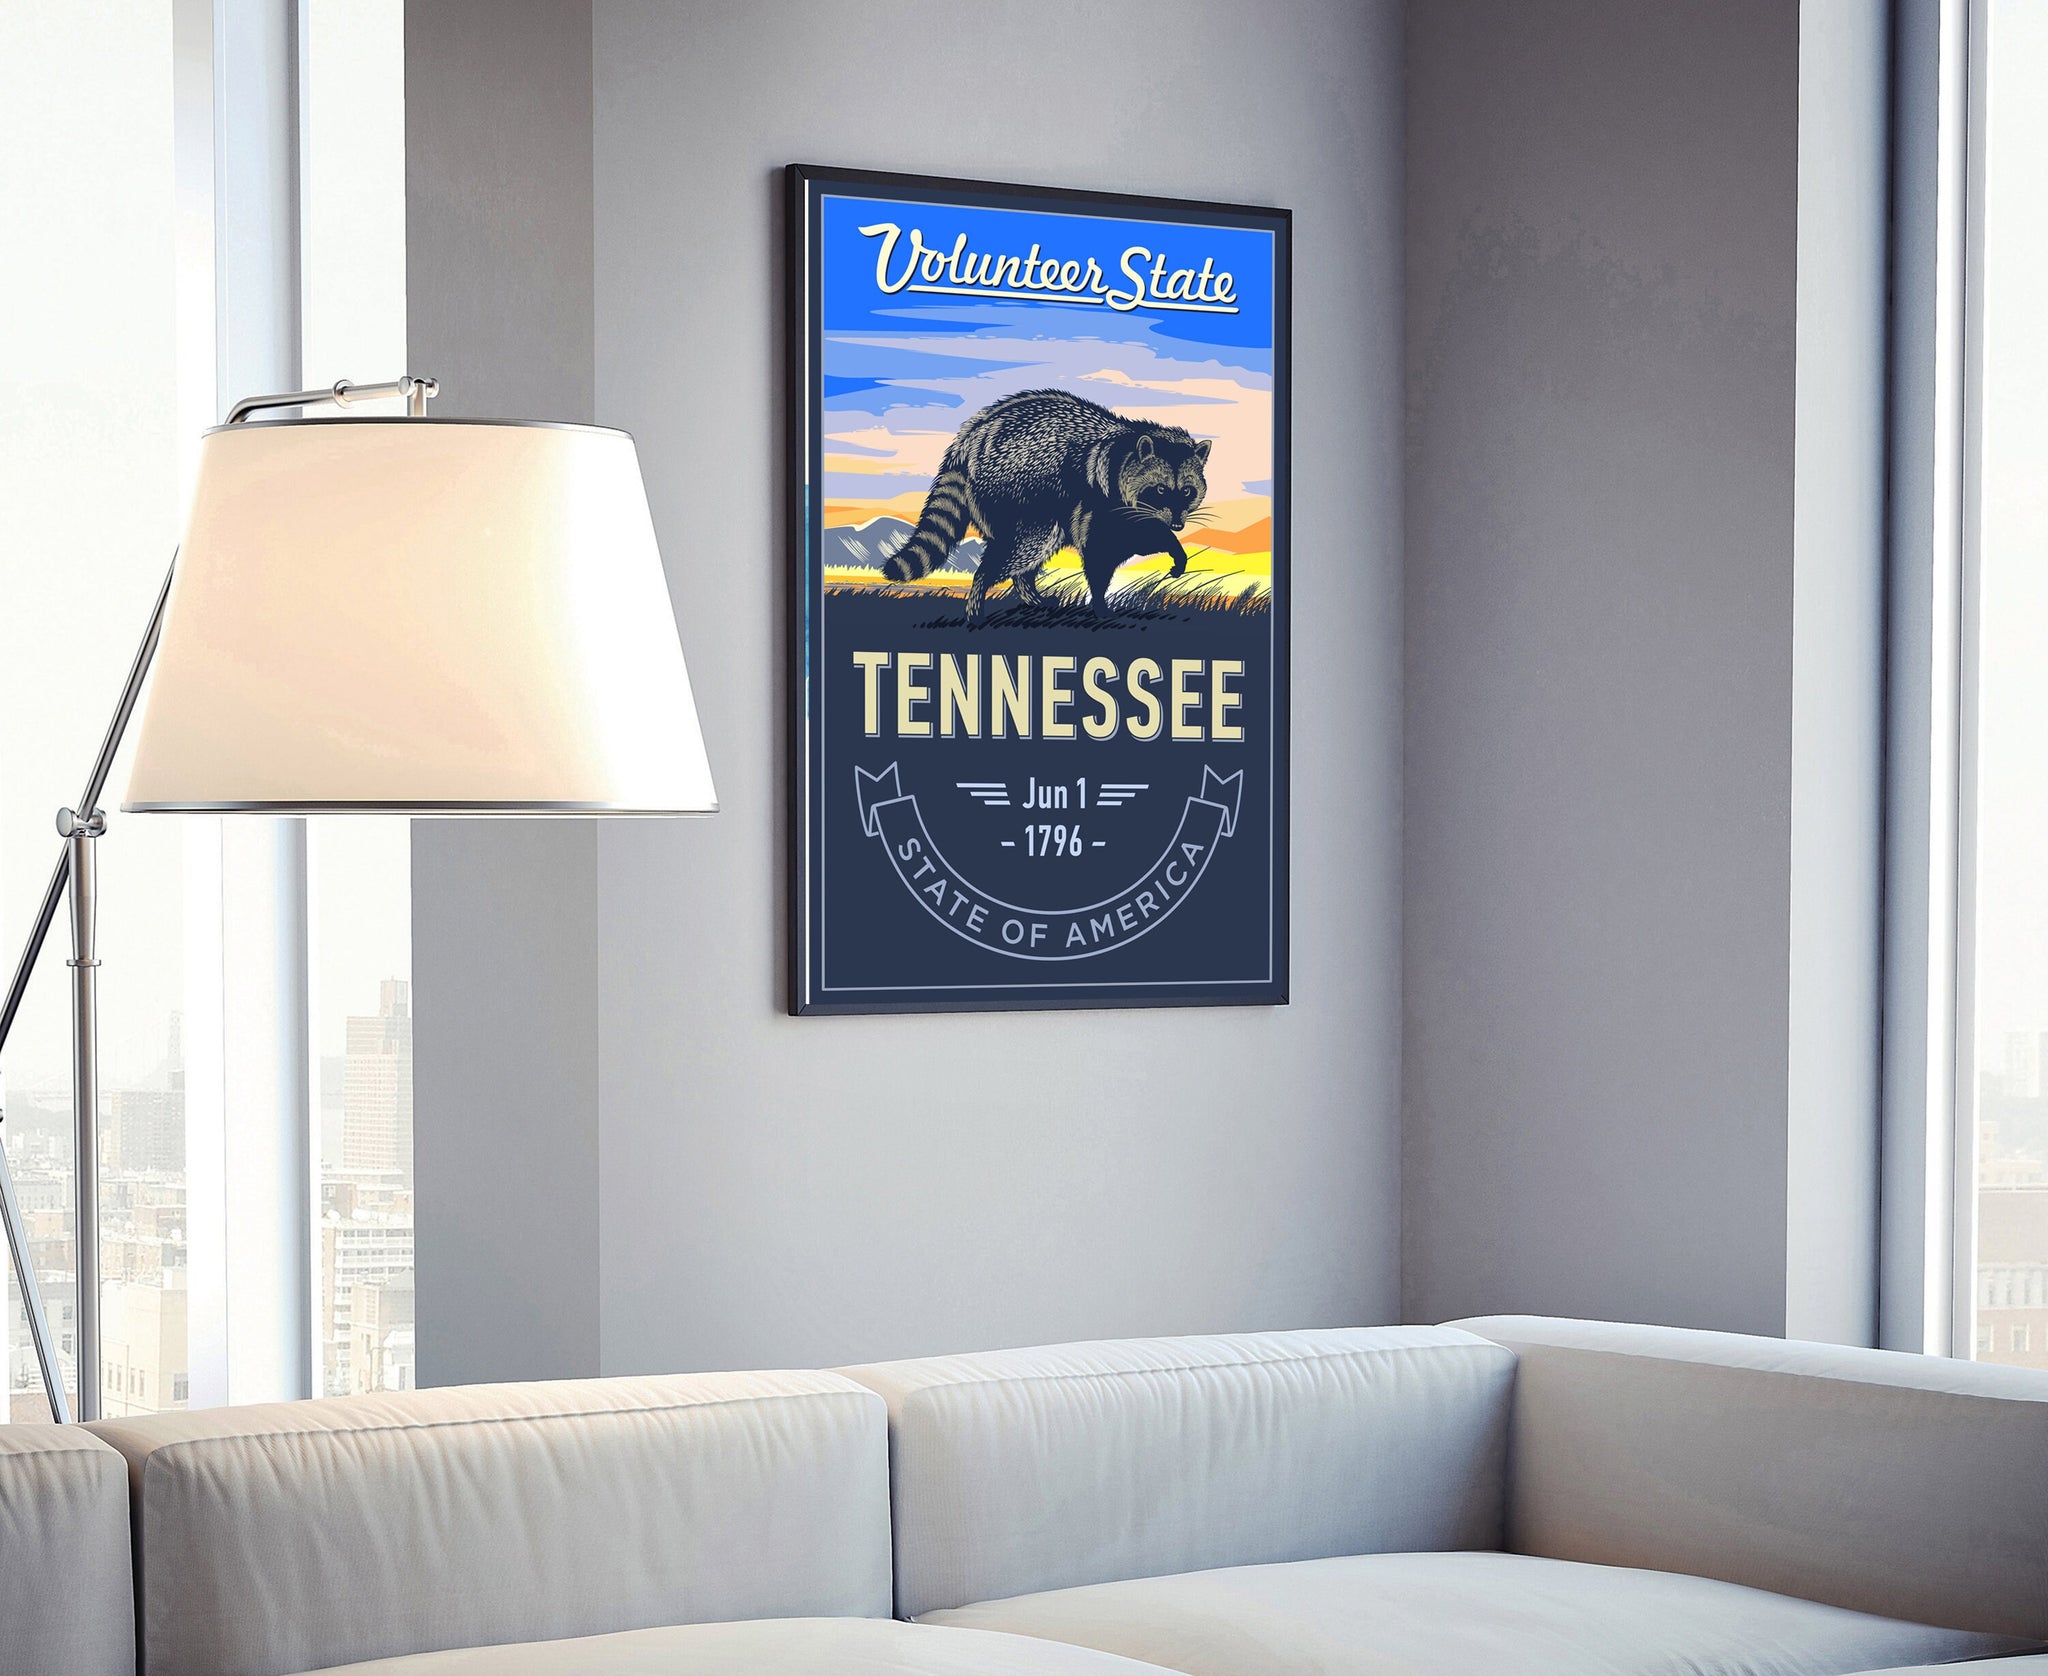 United States Poster, Tennessee State Poster Print, Tennessee State Emblem Poster, Retro Travel State Poster, Home Wall Art, Office Wall Art